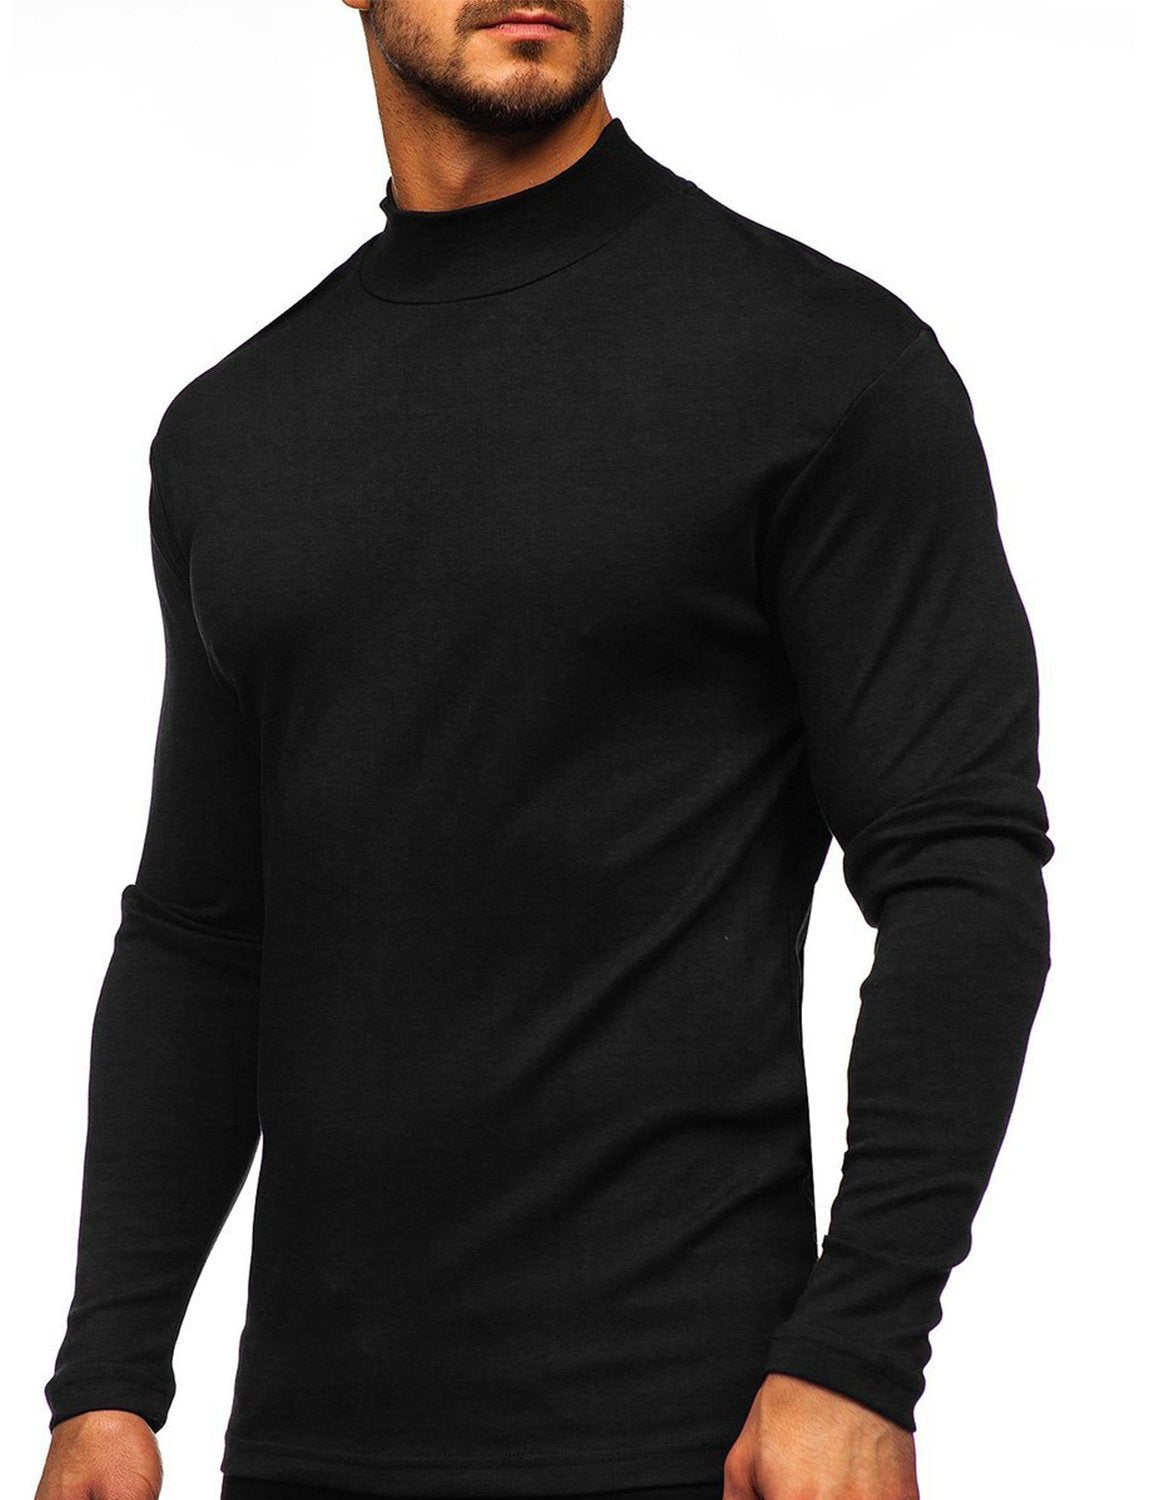 Men's Casual High-Neck Solid Color Long Sleeve T-shirt